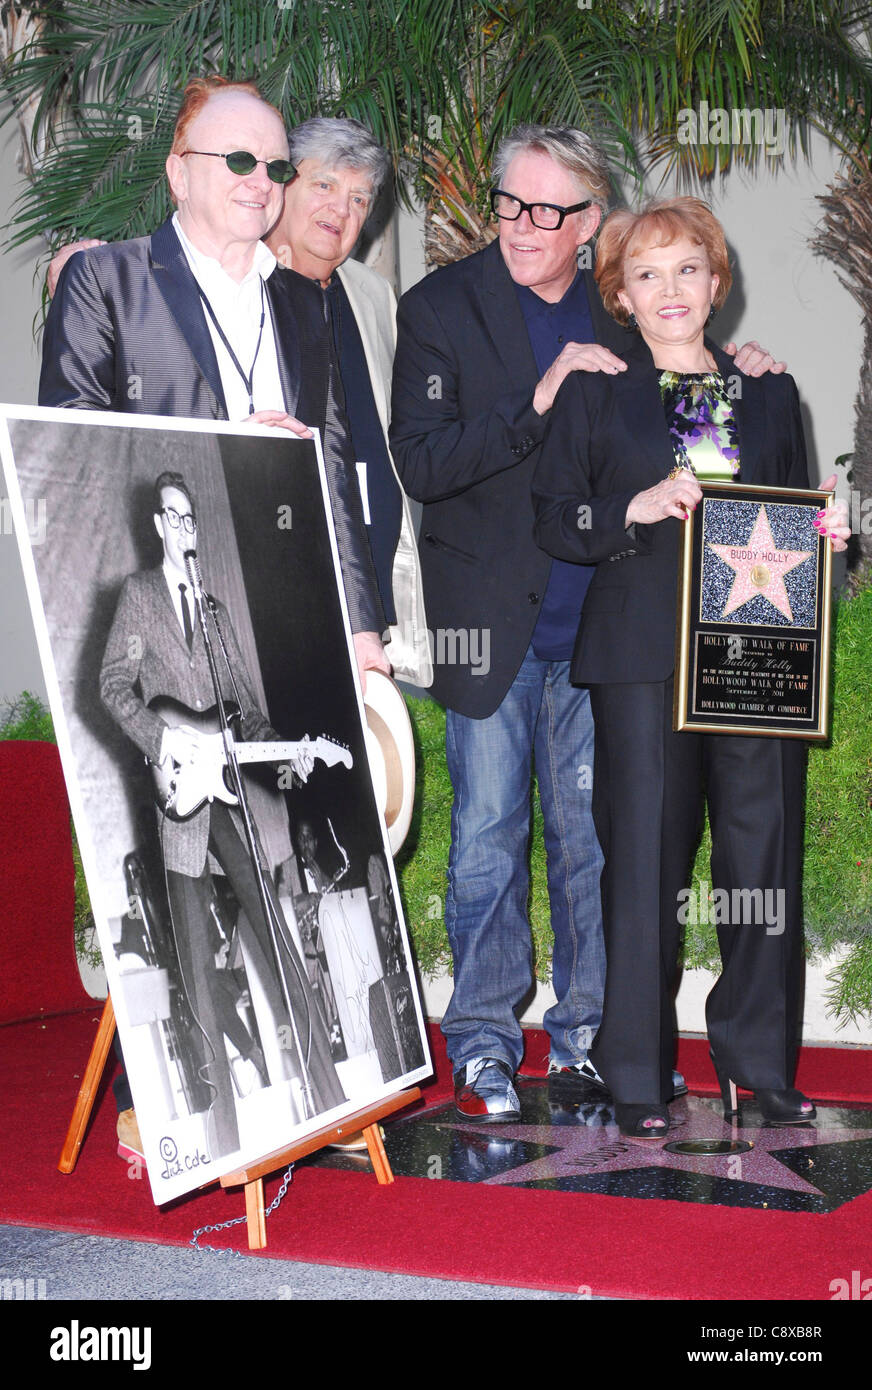 (From left) Peter Asher, Phil Everly, Gary Busey, Maria Elena Holly (with picture of Buddy Holly) at the induction ceremony for Stock Photo